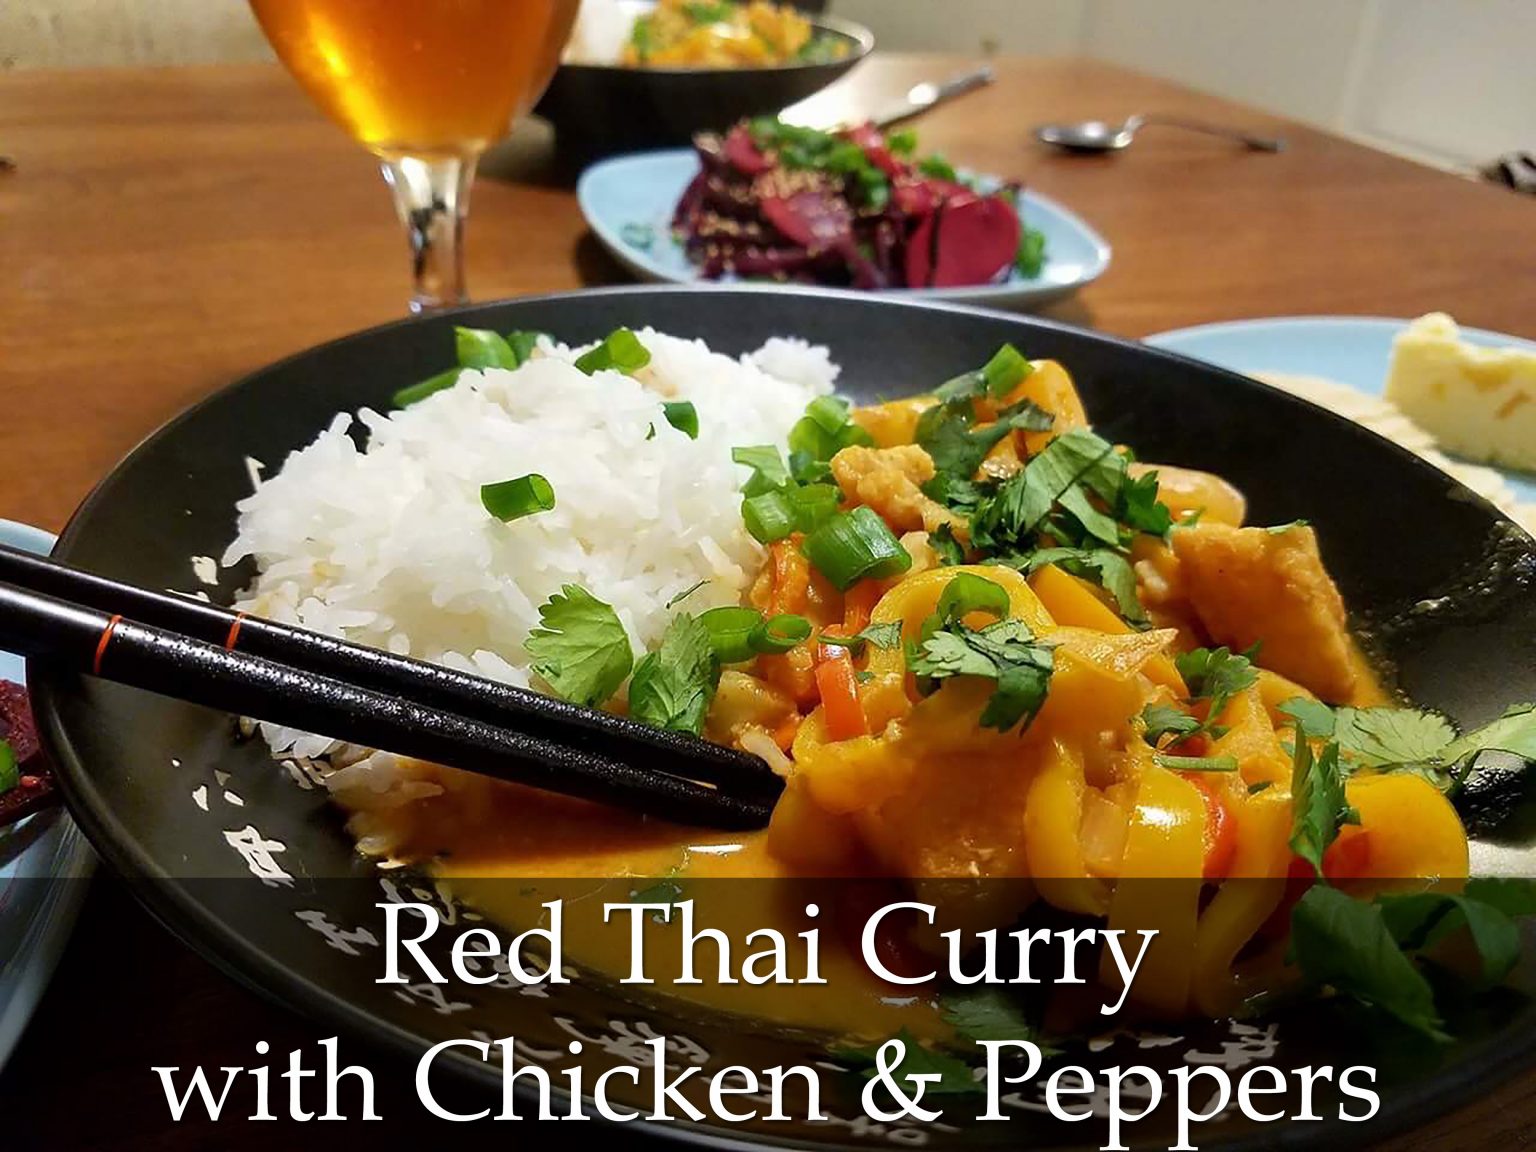 Red Thai Curry with Chicken and Peppers | GradFood